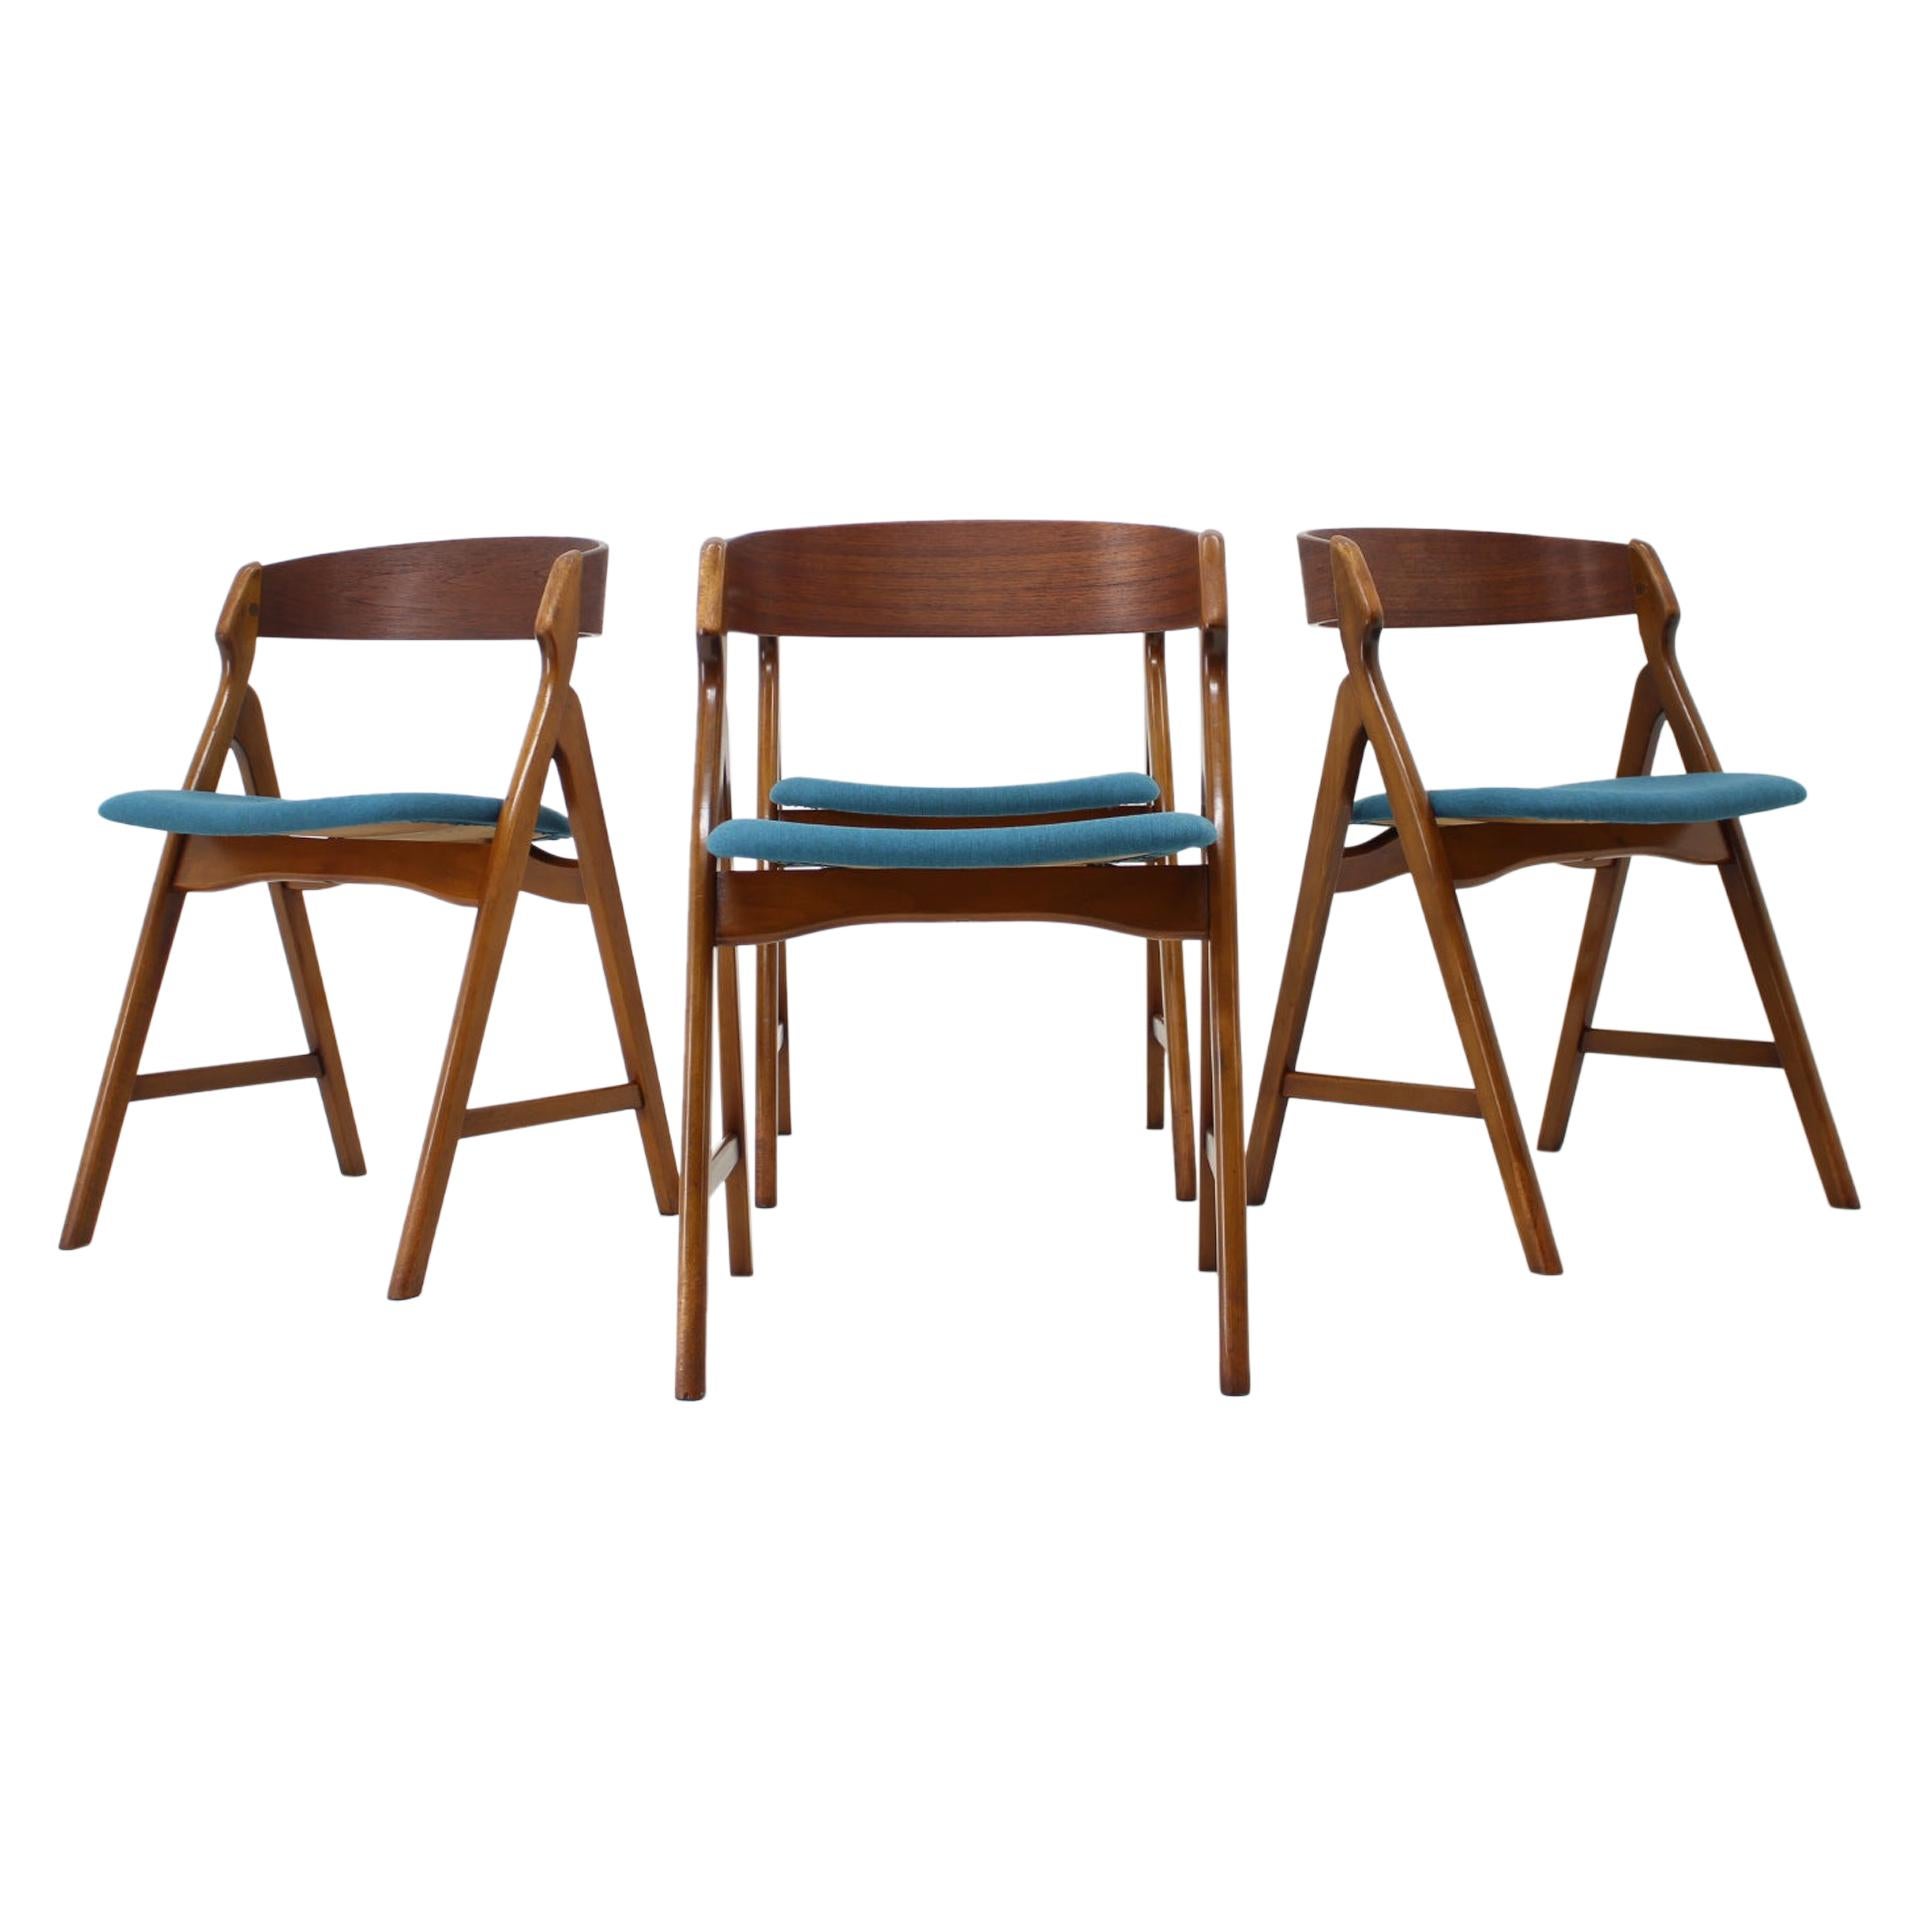 Set of 1960s Dining Chairs by Henning Kjaernulf for Boltinge Støle Møbelfabrik